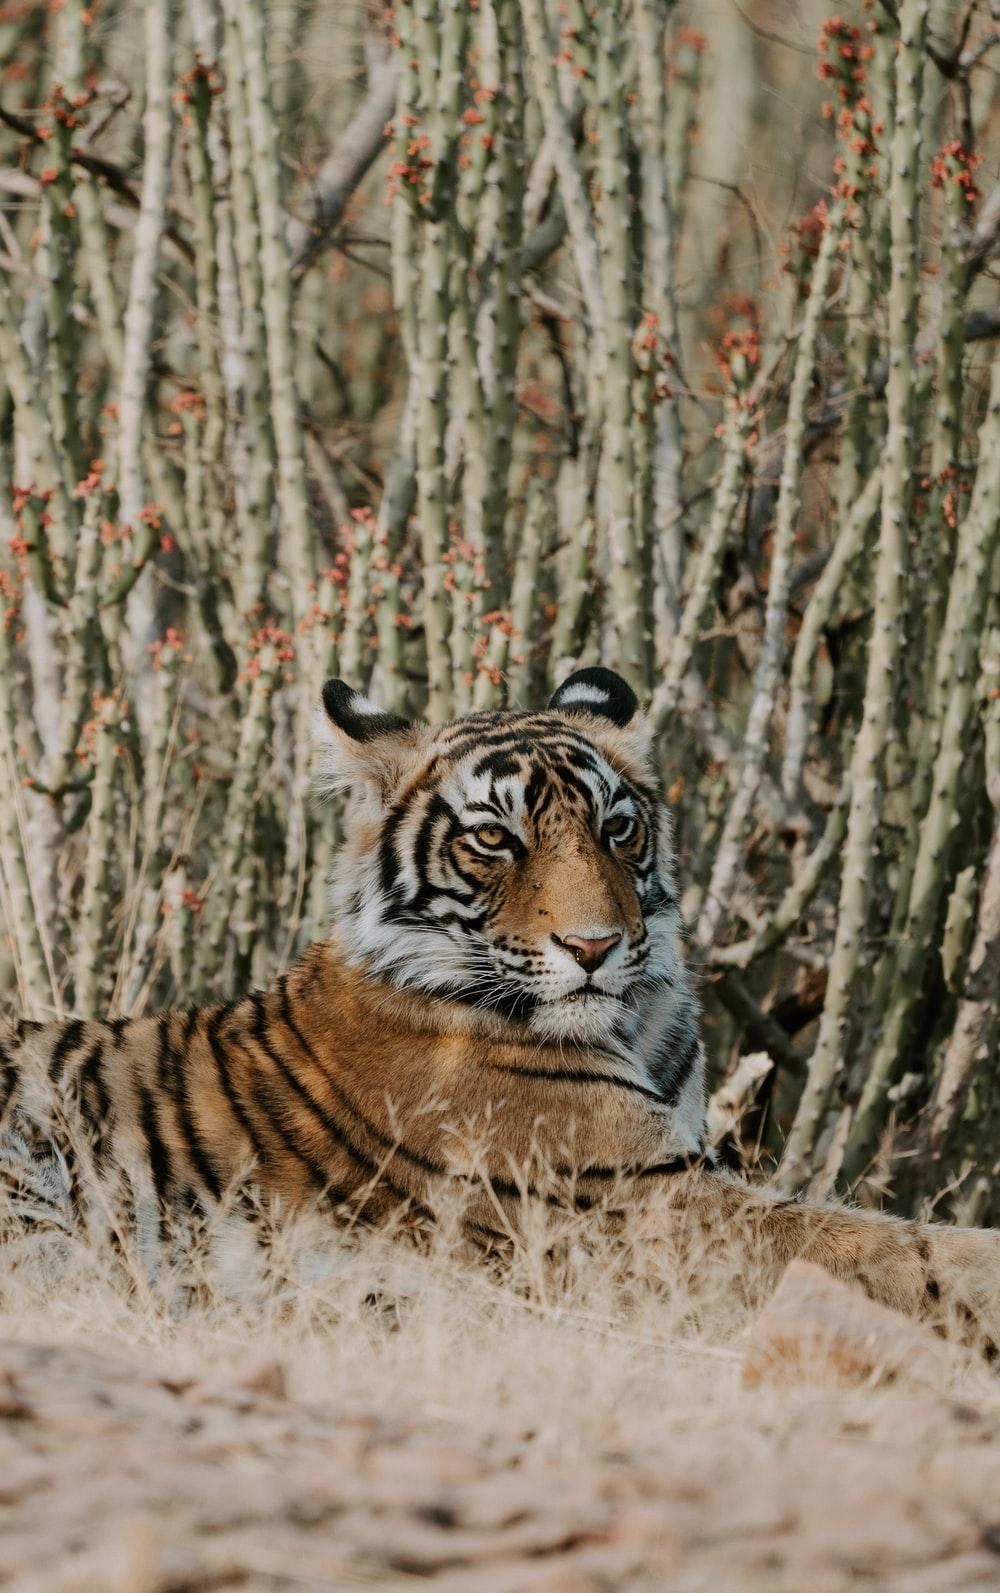 Tiger in a zoo. HD photo